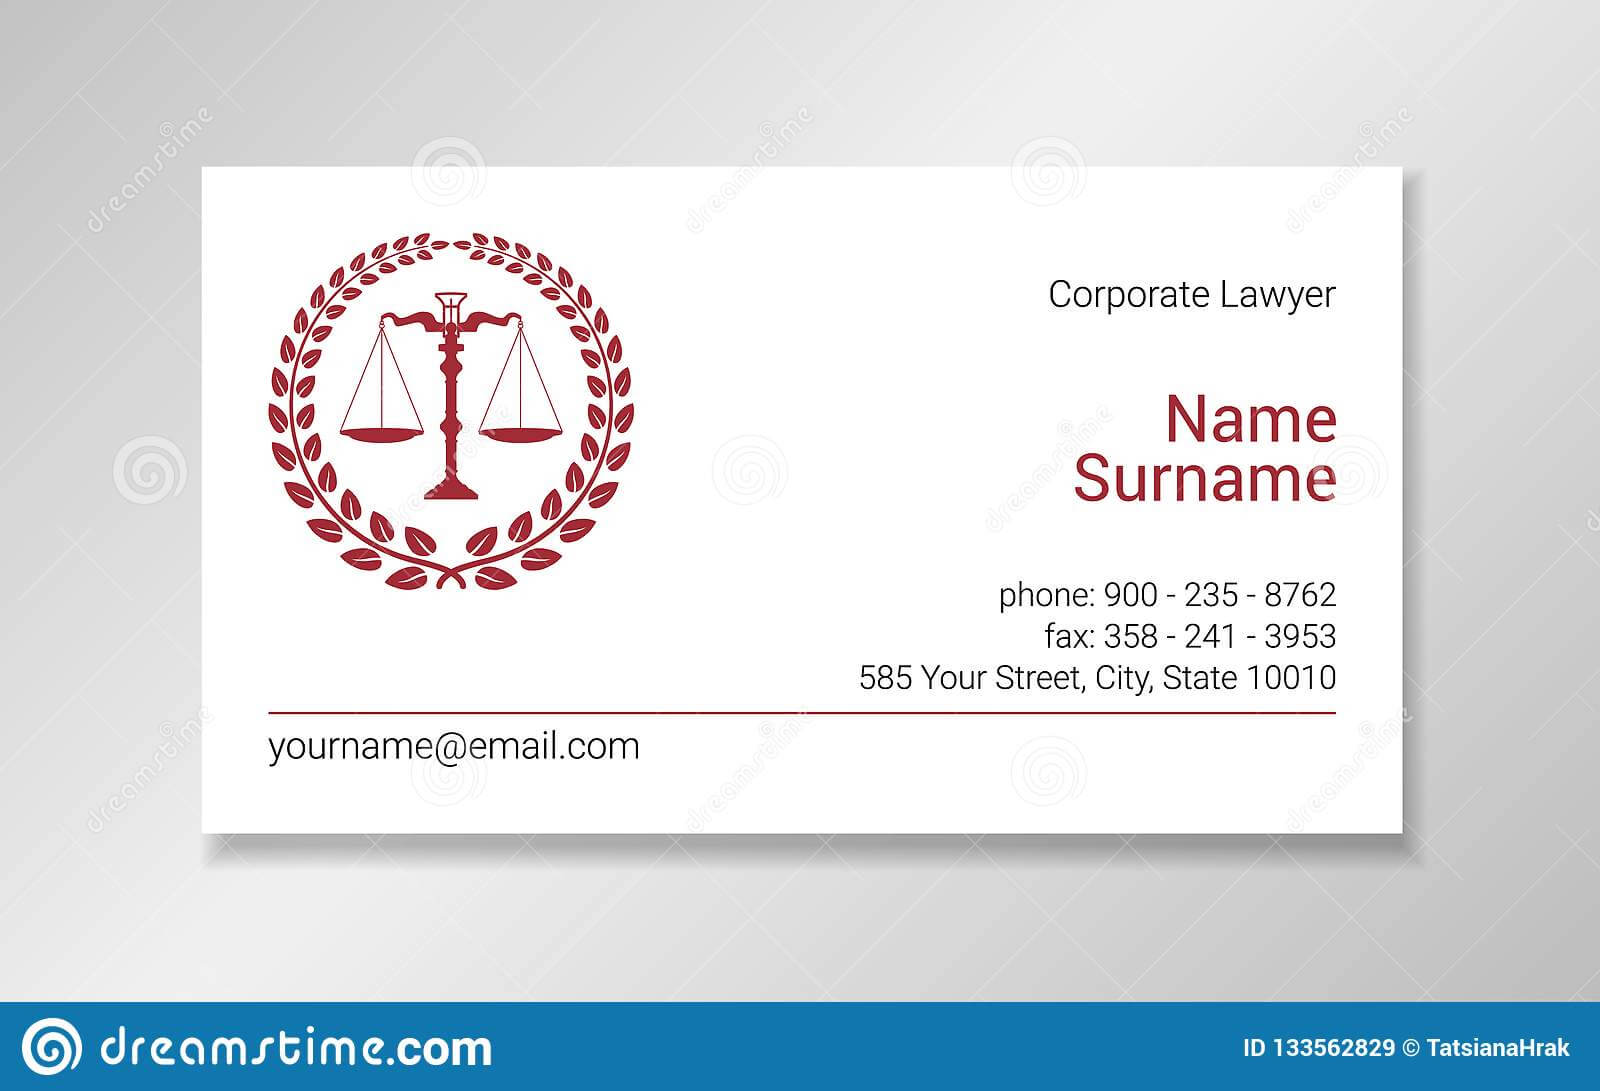 Lawyer Business Card Design Template With Burgundy Scales Throughout Lawyer Business Cards Templates